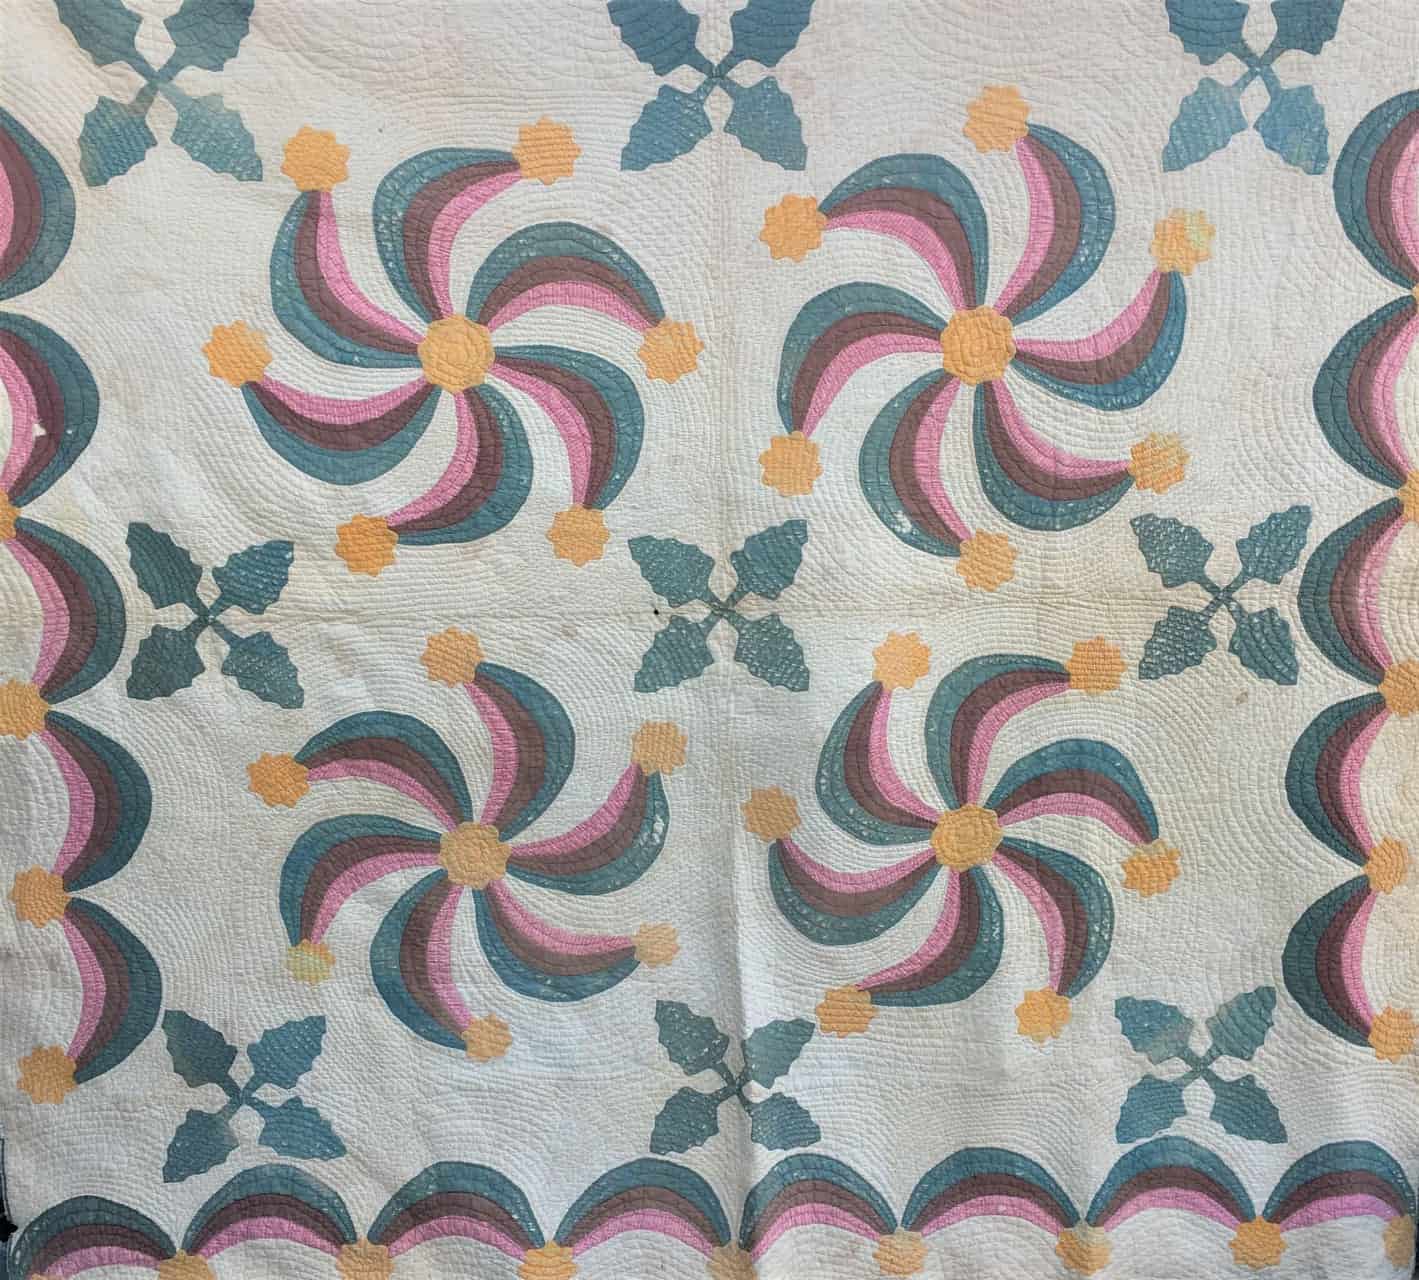 This lively pattern features applique pinwheel-type patterns with leaves and a scalloped frame.